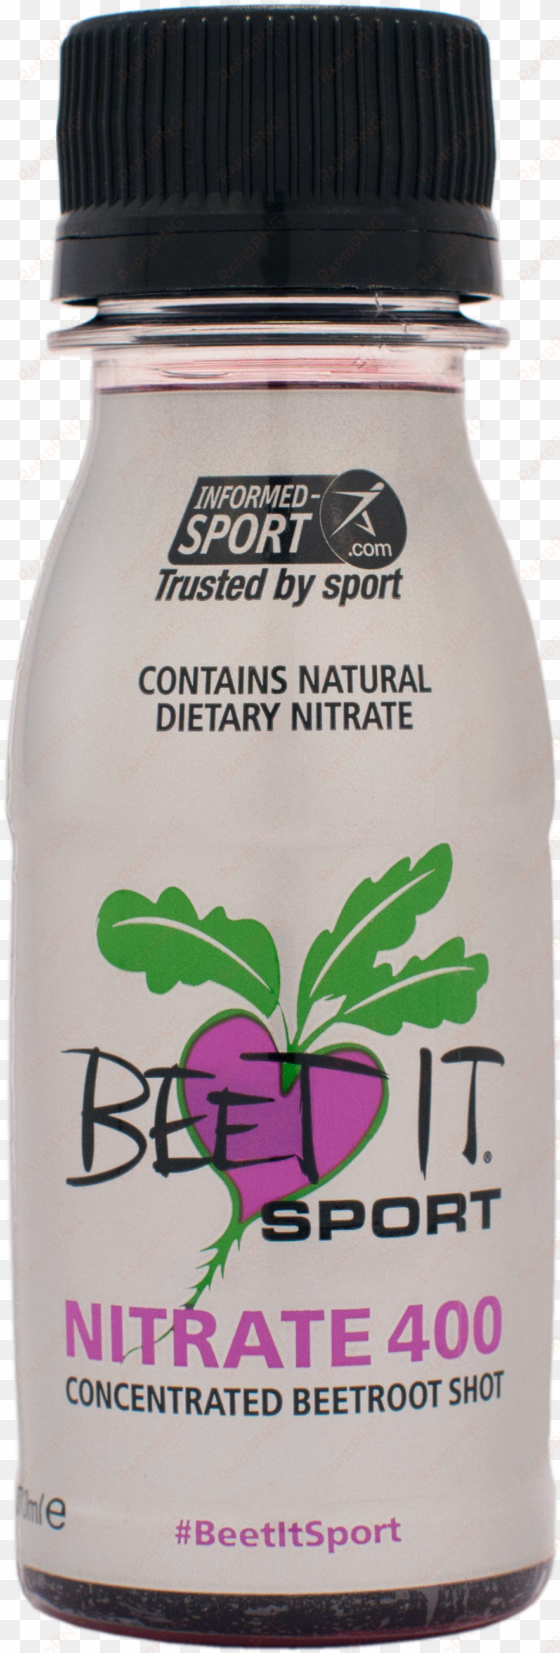 products out there which claim to boost your performance - beet it sports shots 70ml x 15